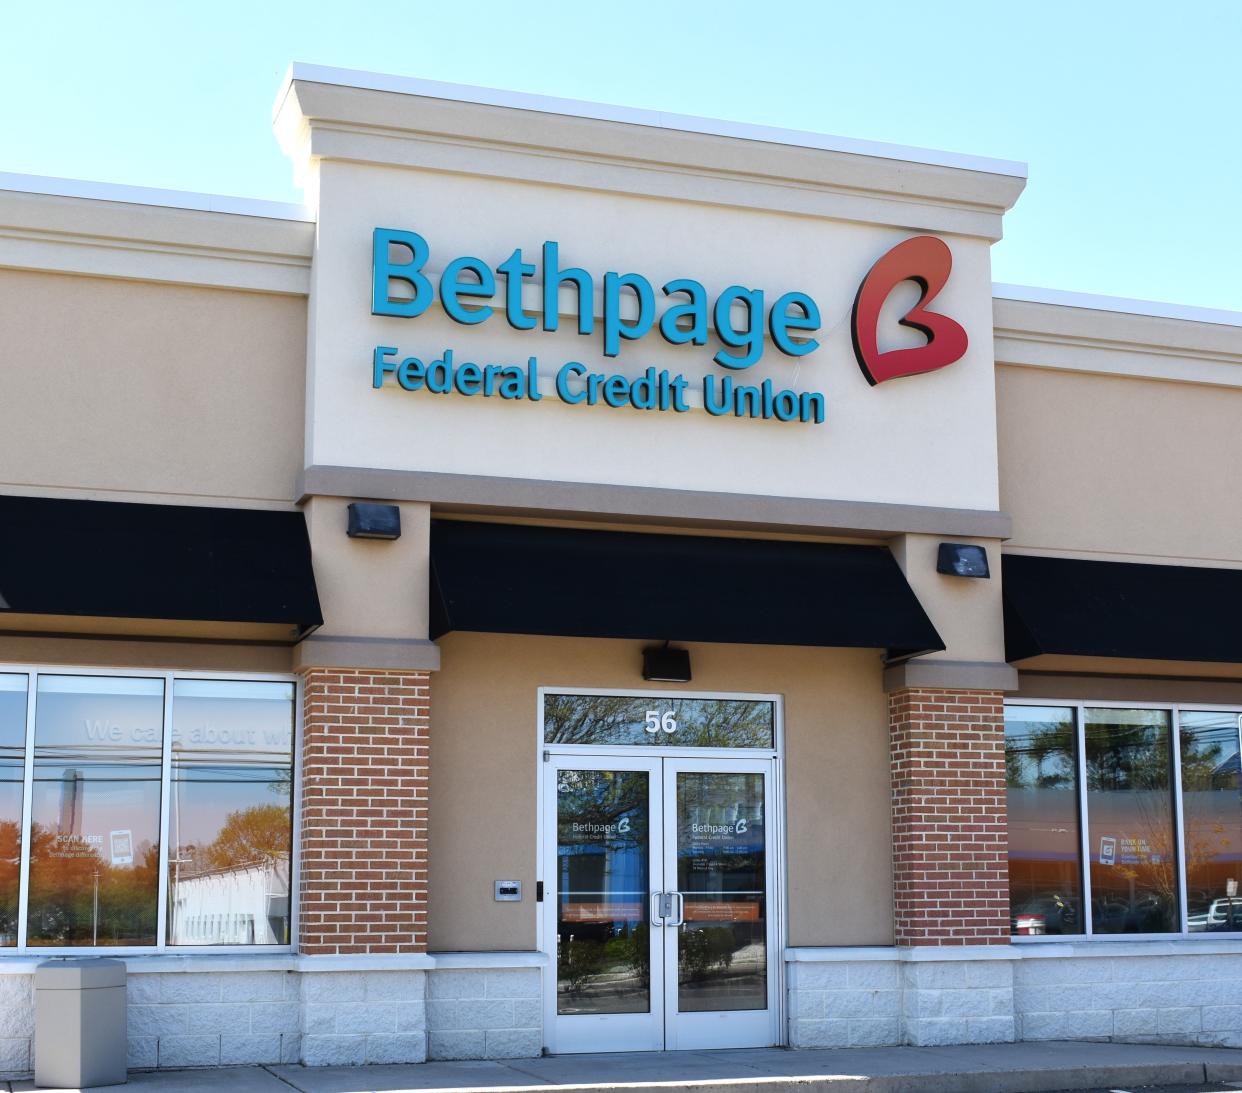 Bethpage Federal Credit Union, with headquarters on Long Island, has opened its first New Jersey branch in Cherry Hill.